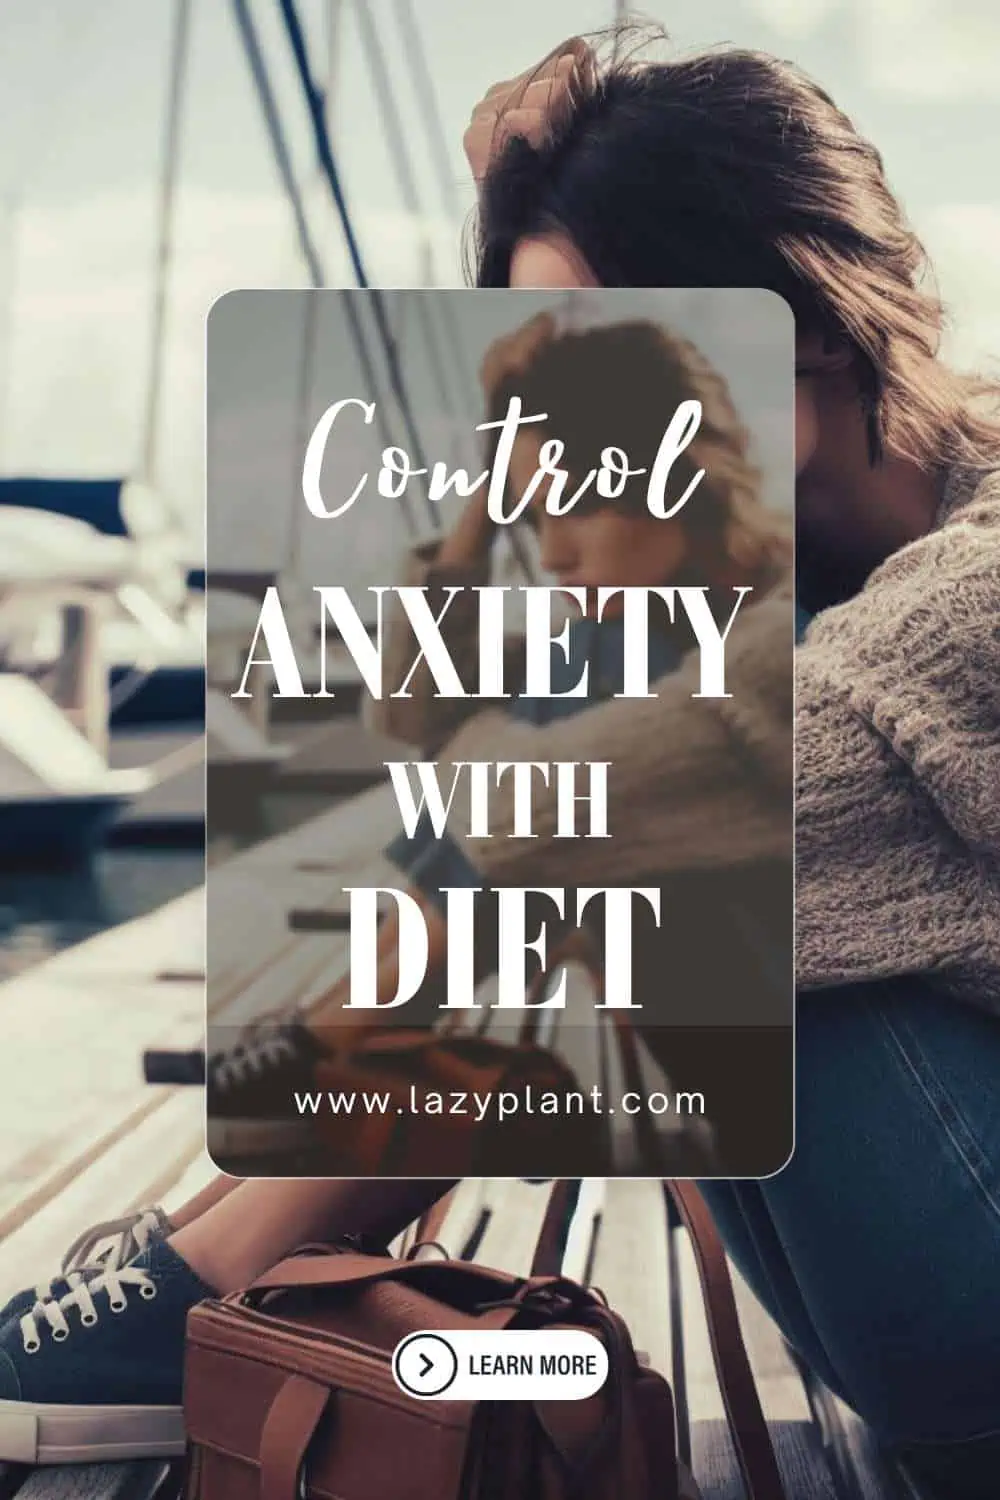 Control anxiety with food.